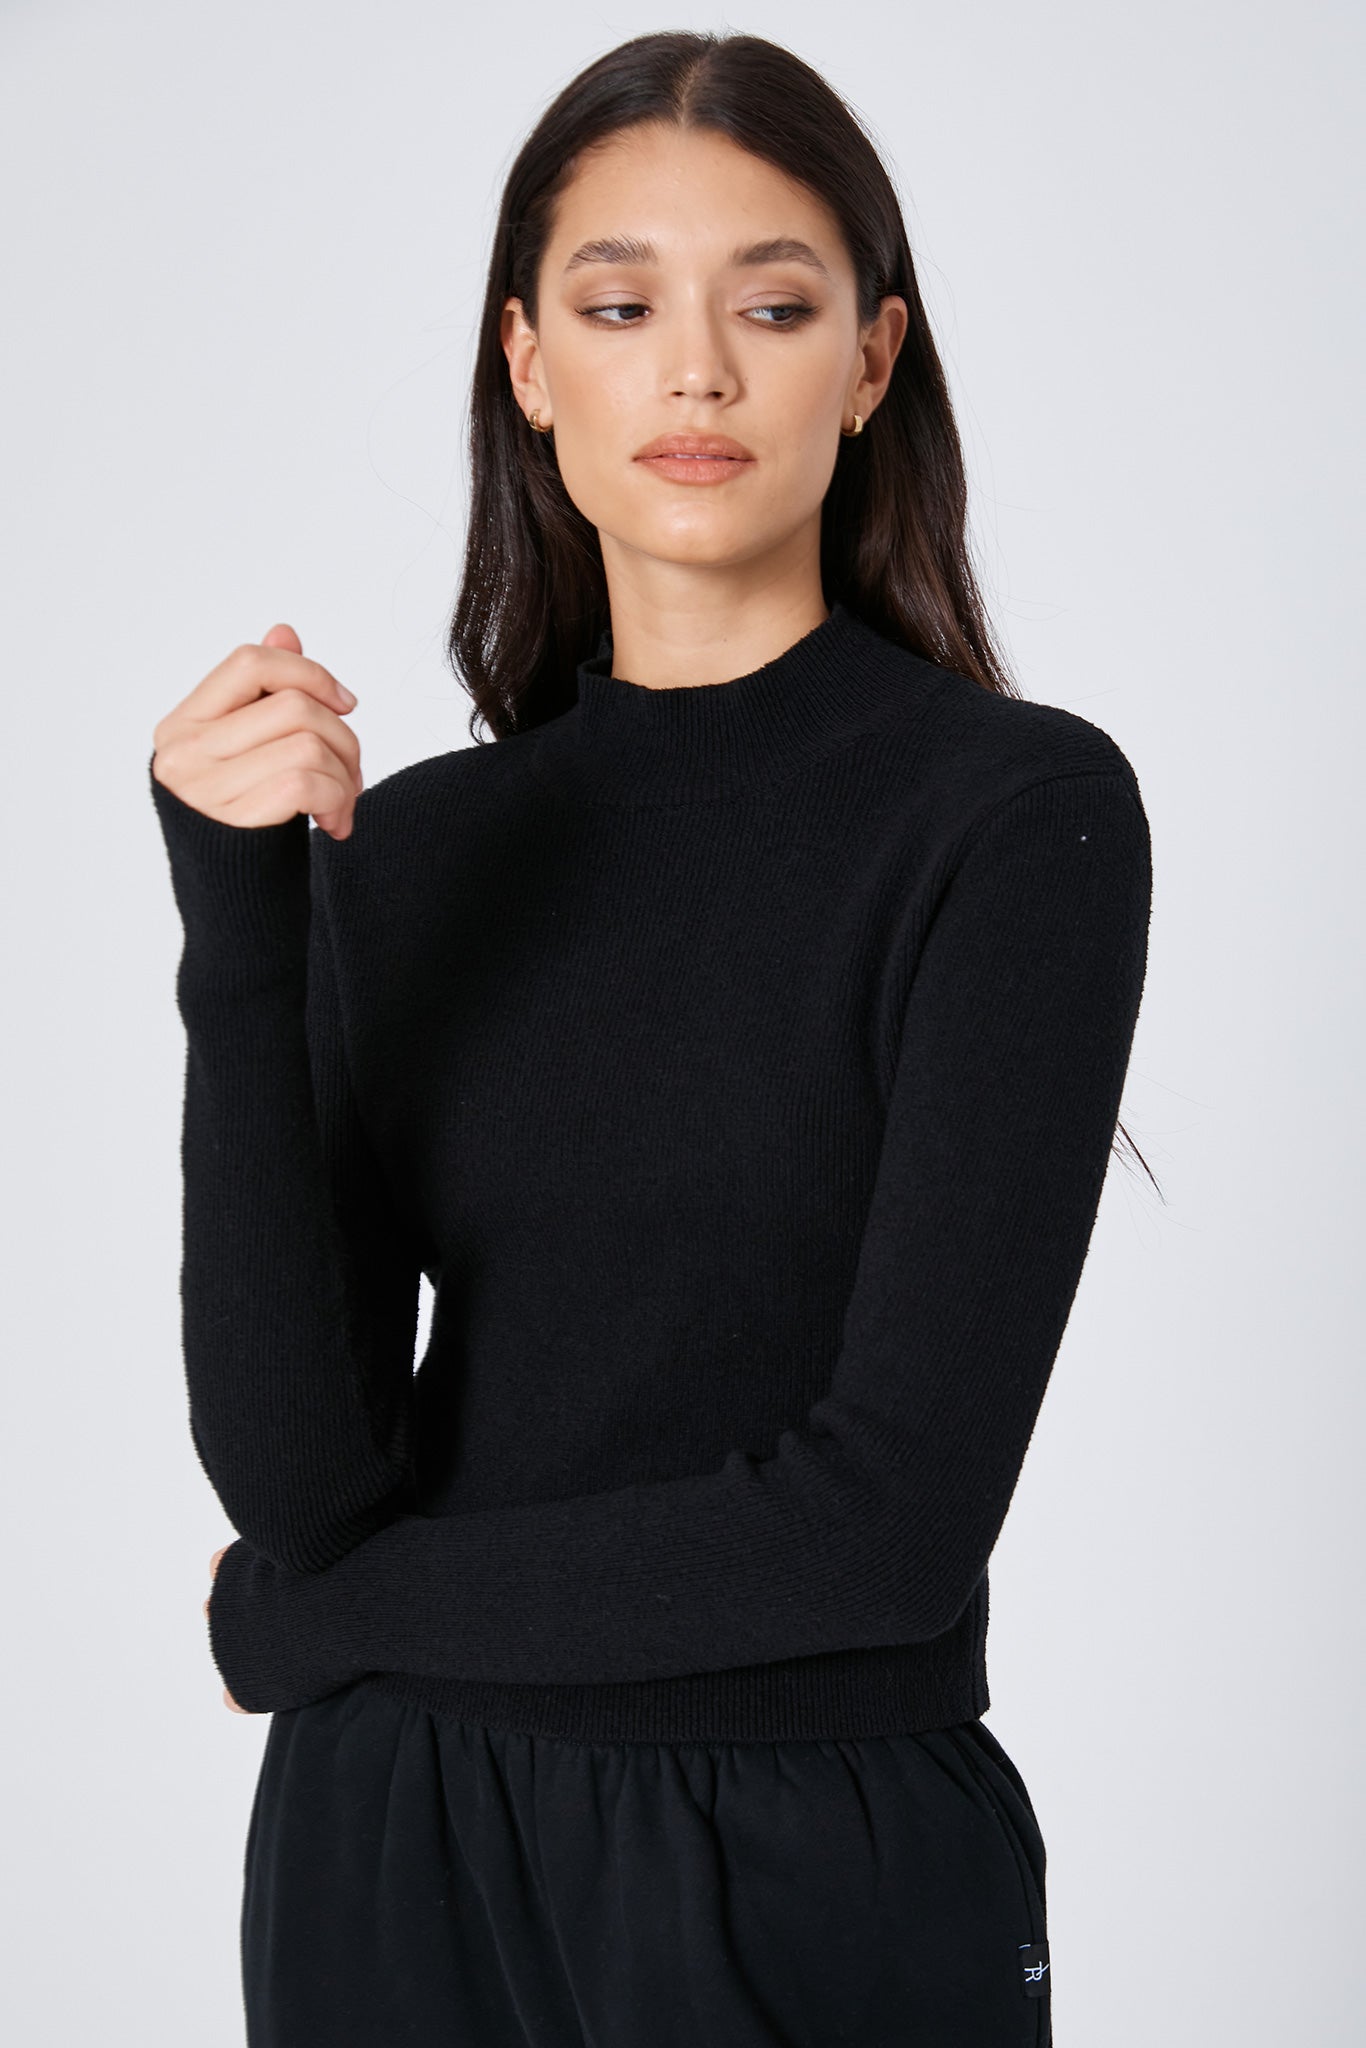 The Long Sleeve Top